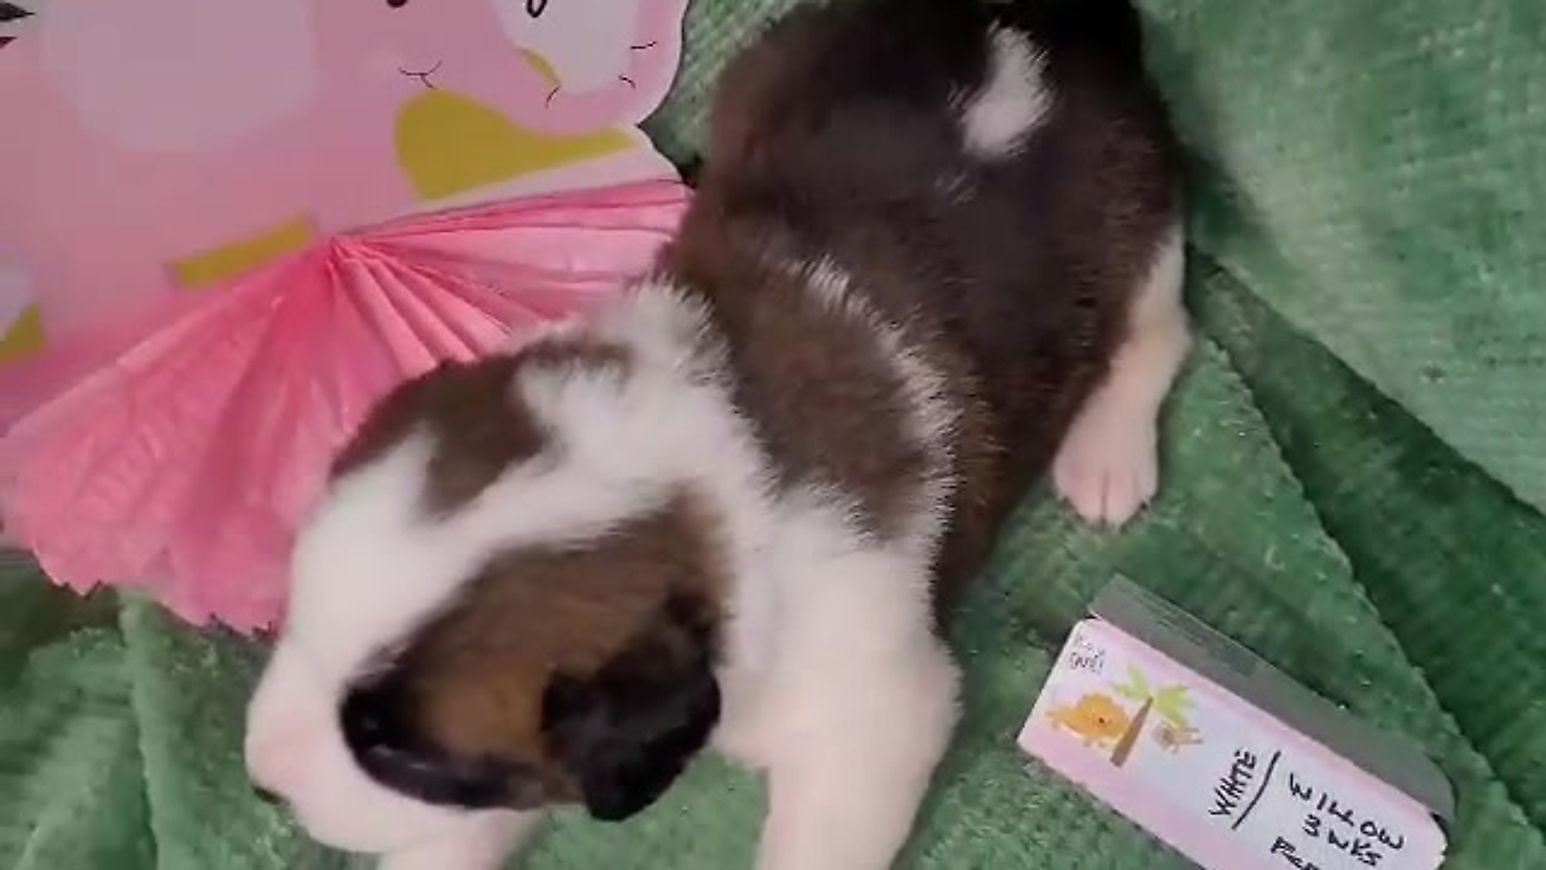 Videos of Puppies 3-5 wk